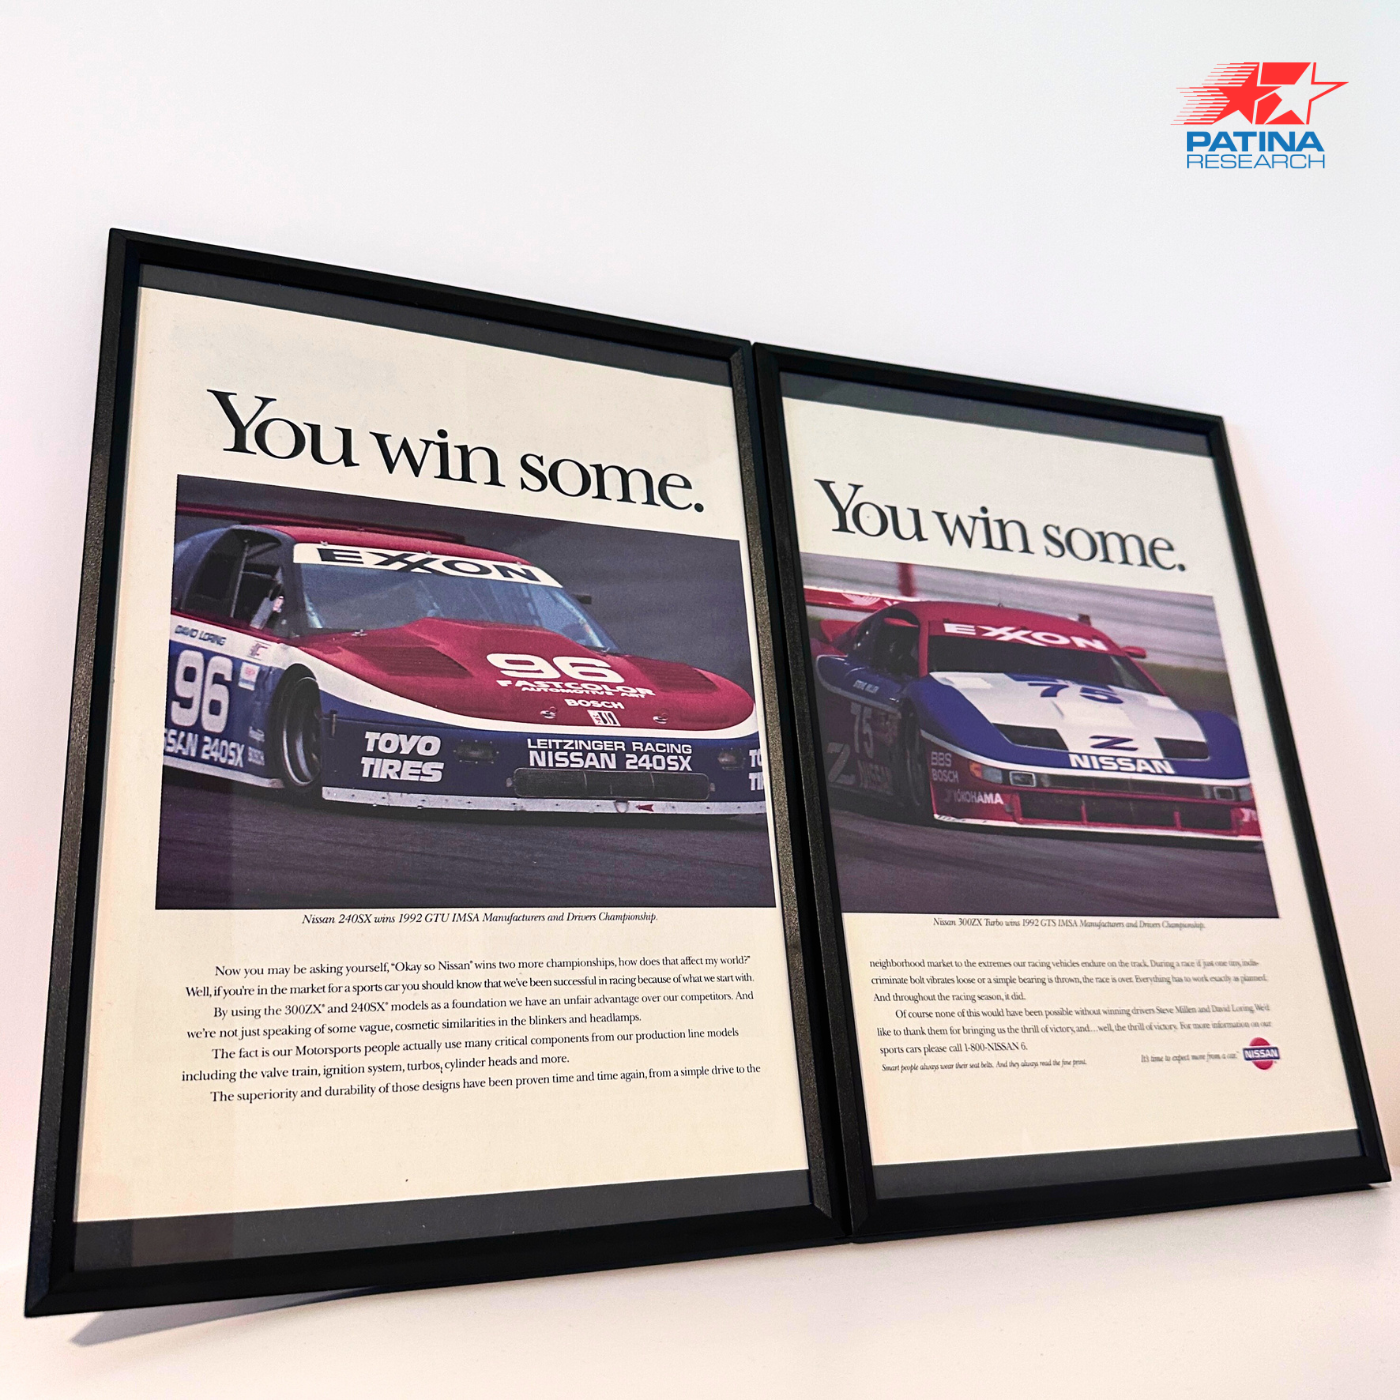 NISSAN 240SX 300ZX Turbo You win some framed ad